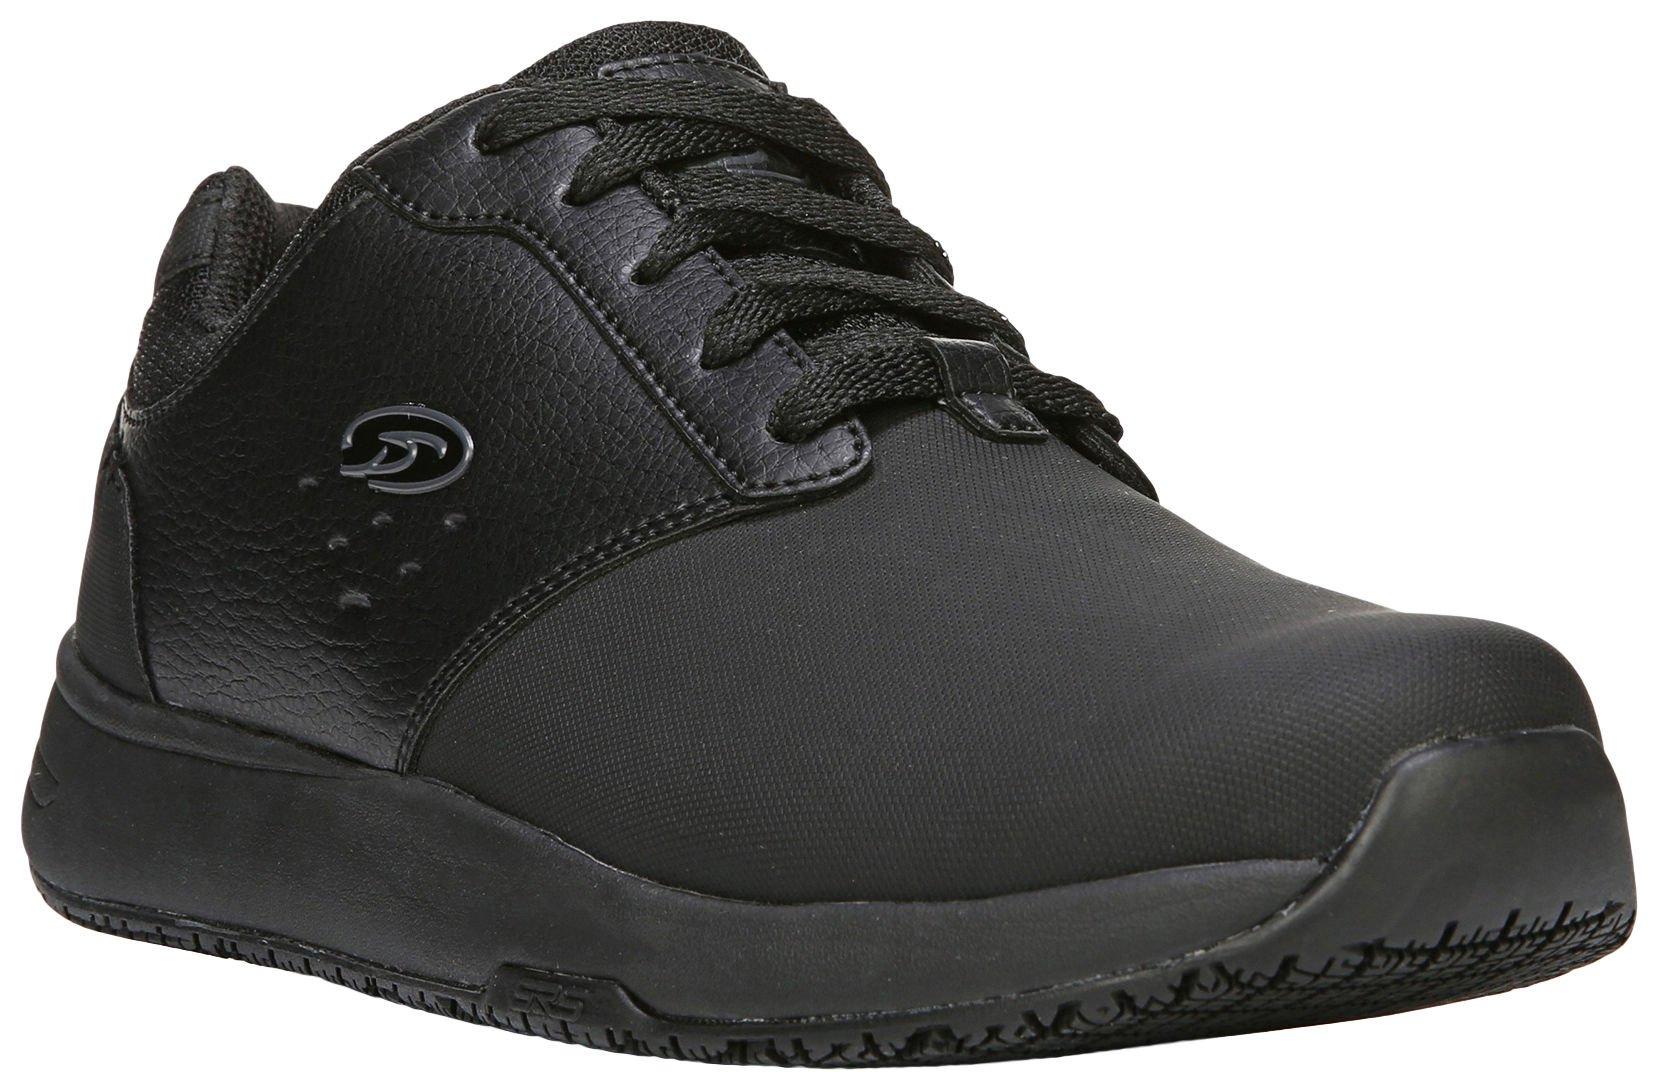 Dr. Scholl's Mens Intrepid Work Shoes